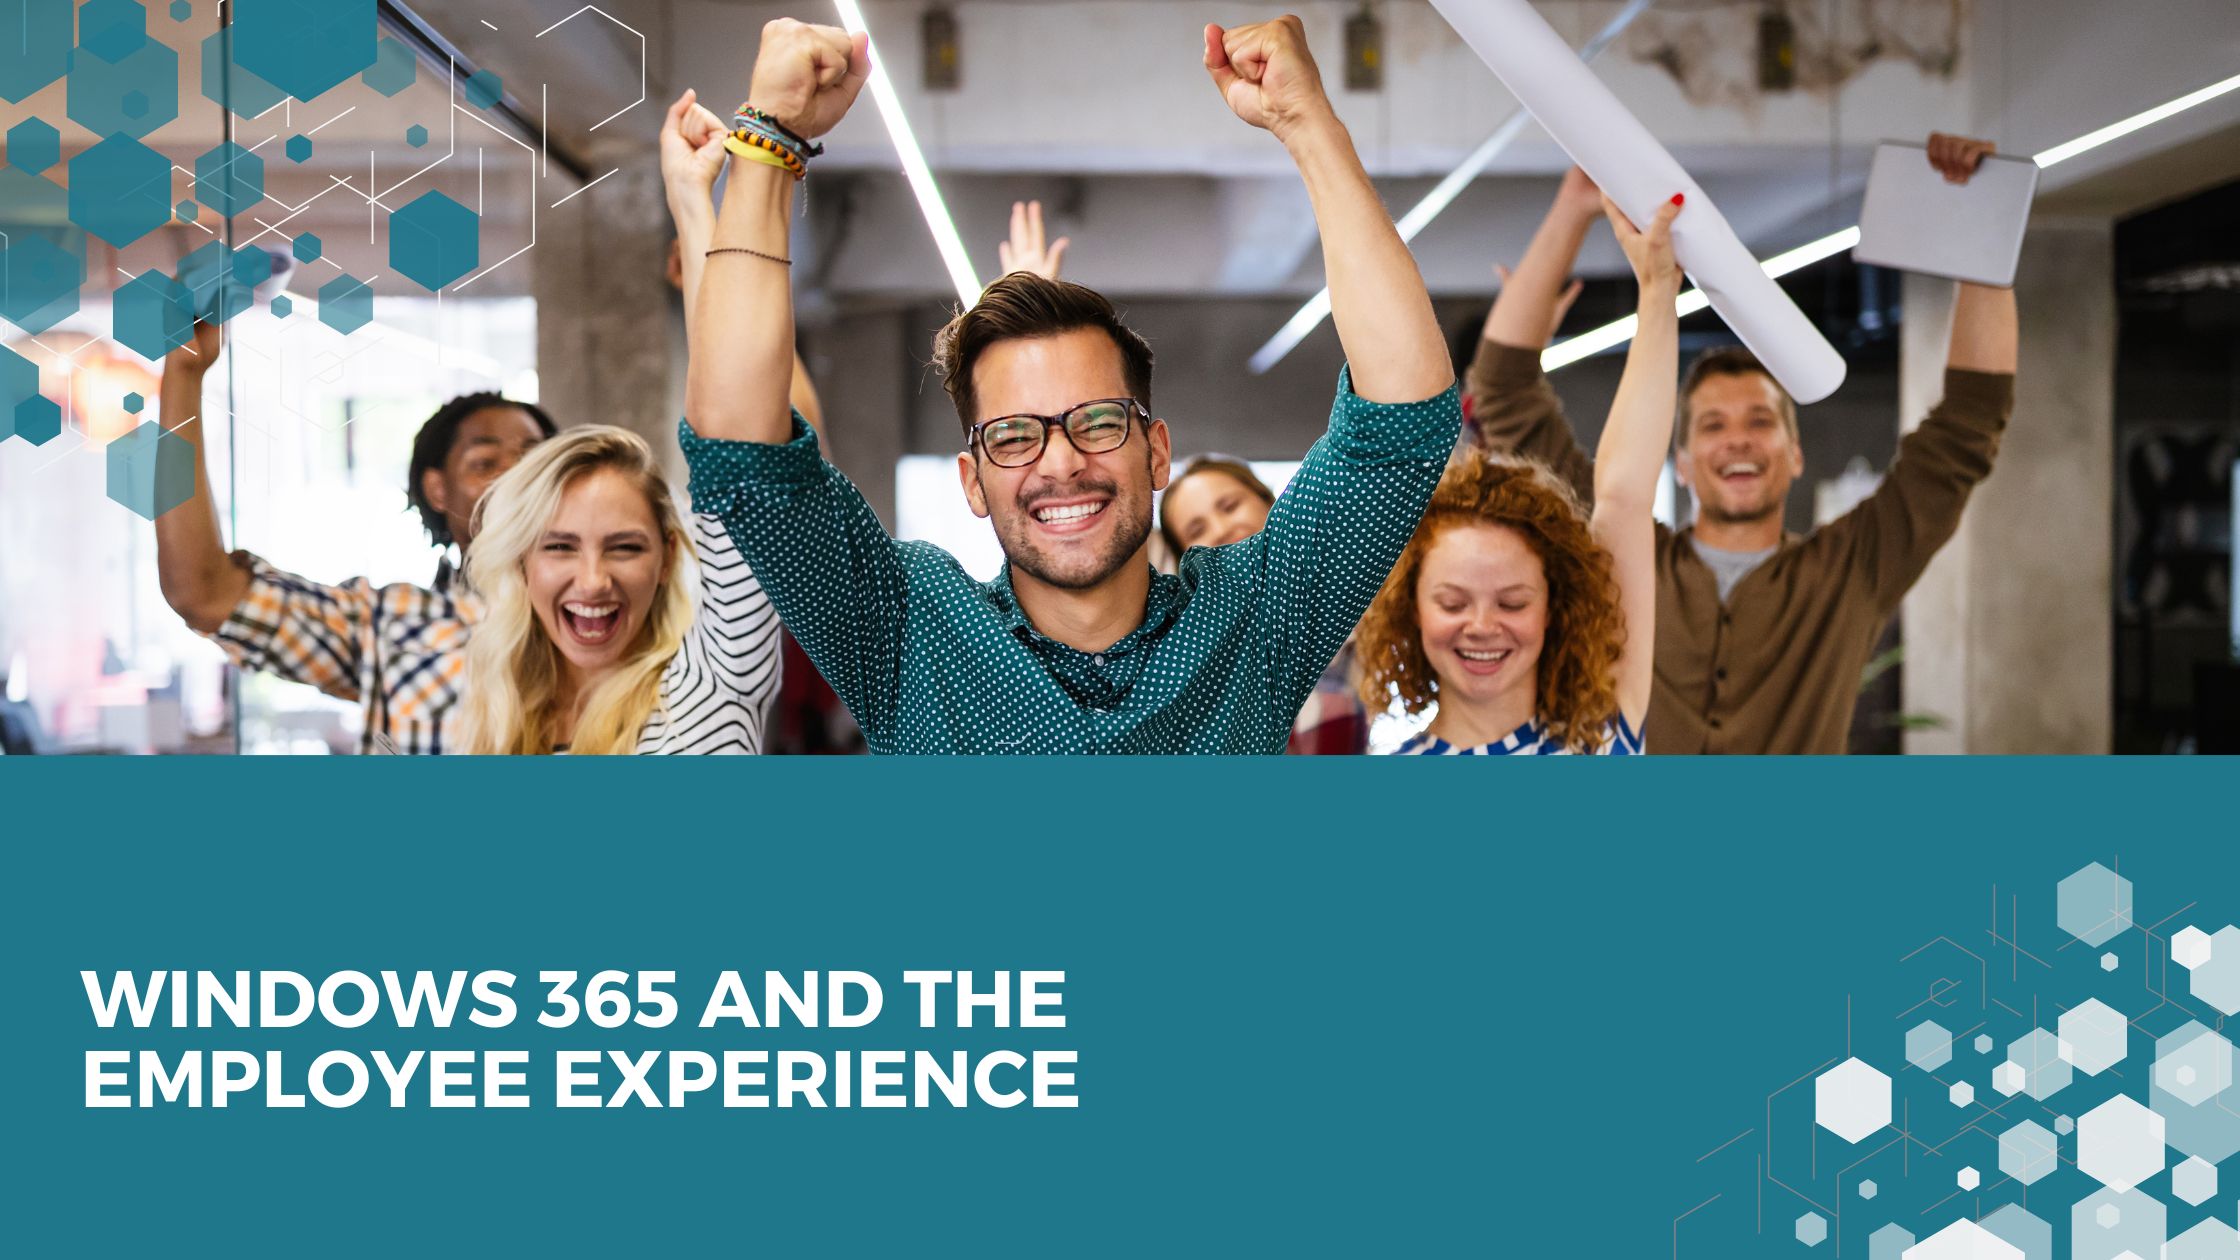 Windows 365 and the Employee Experience